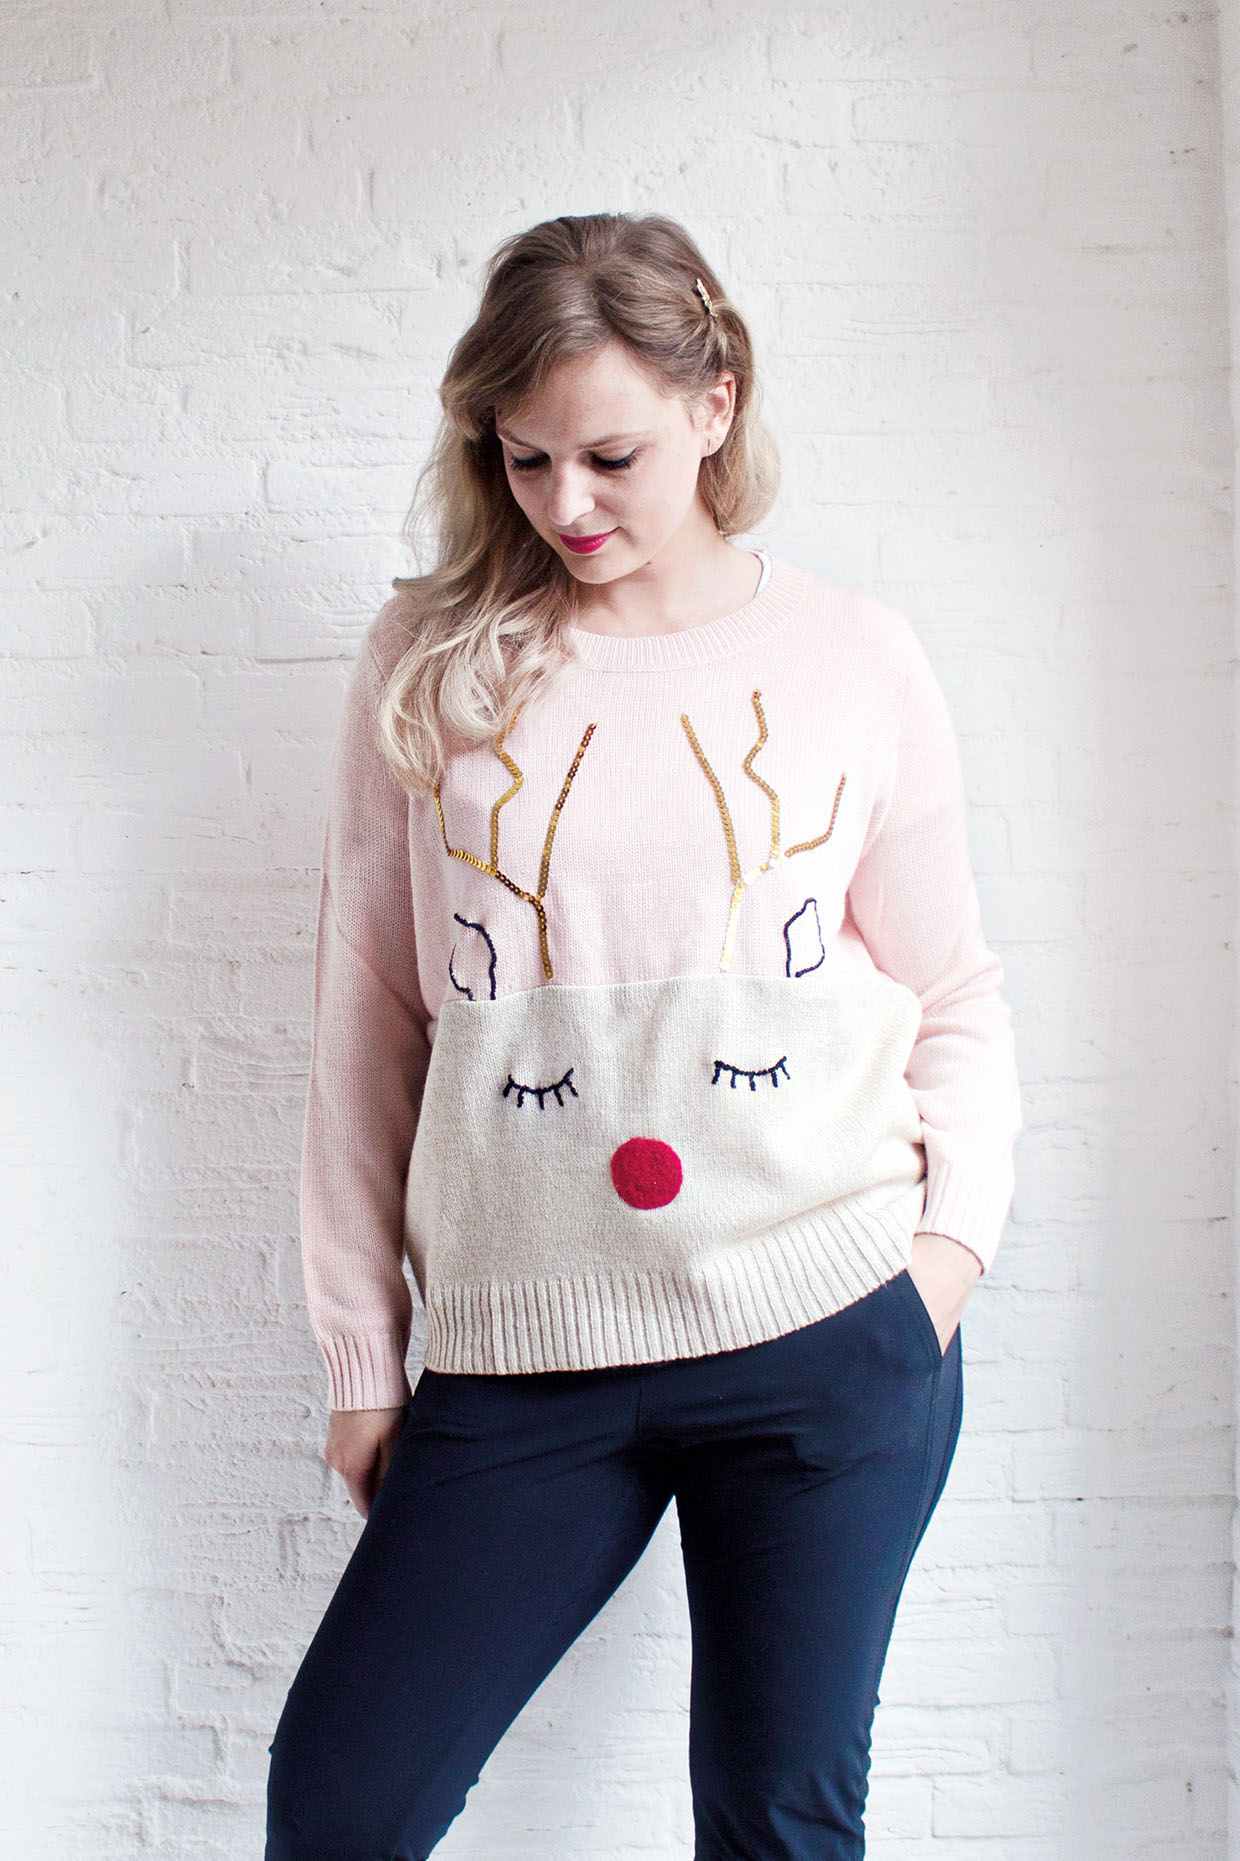 How to sew your own Christmas jumper